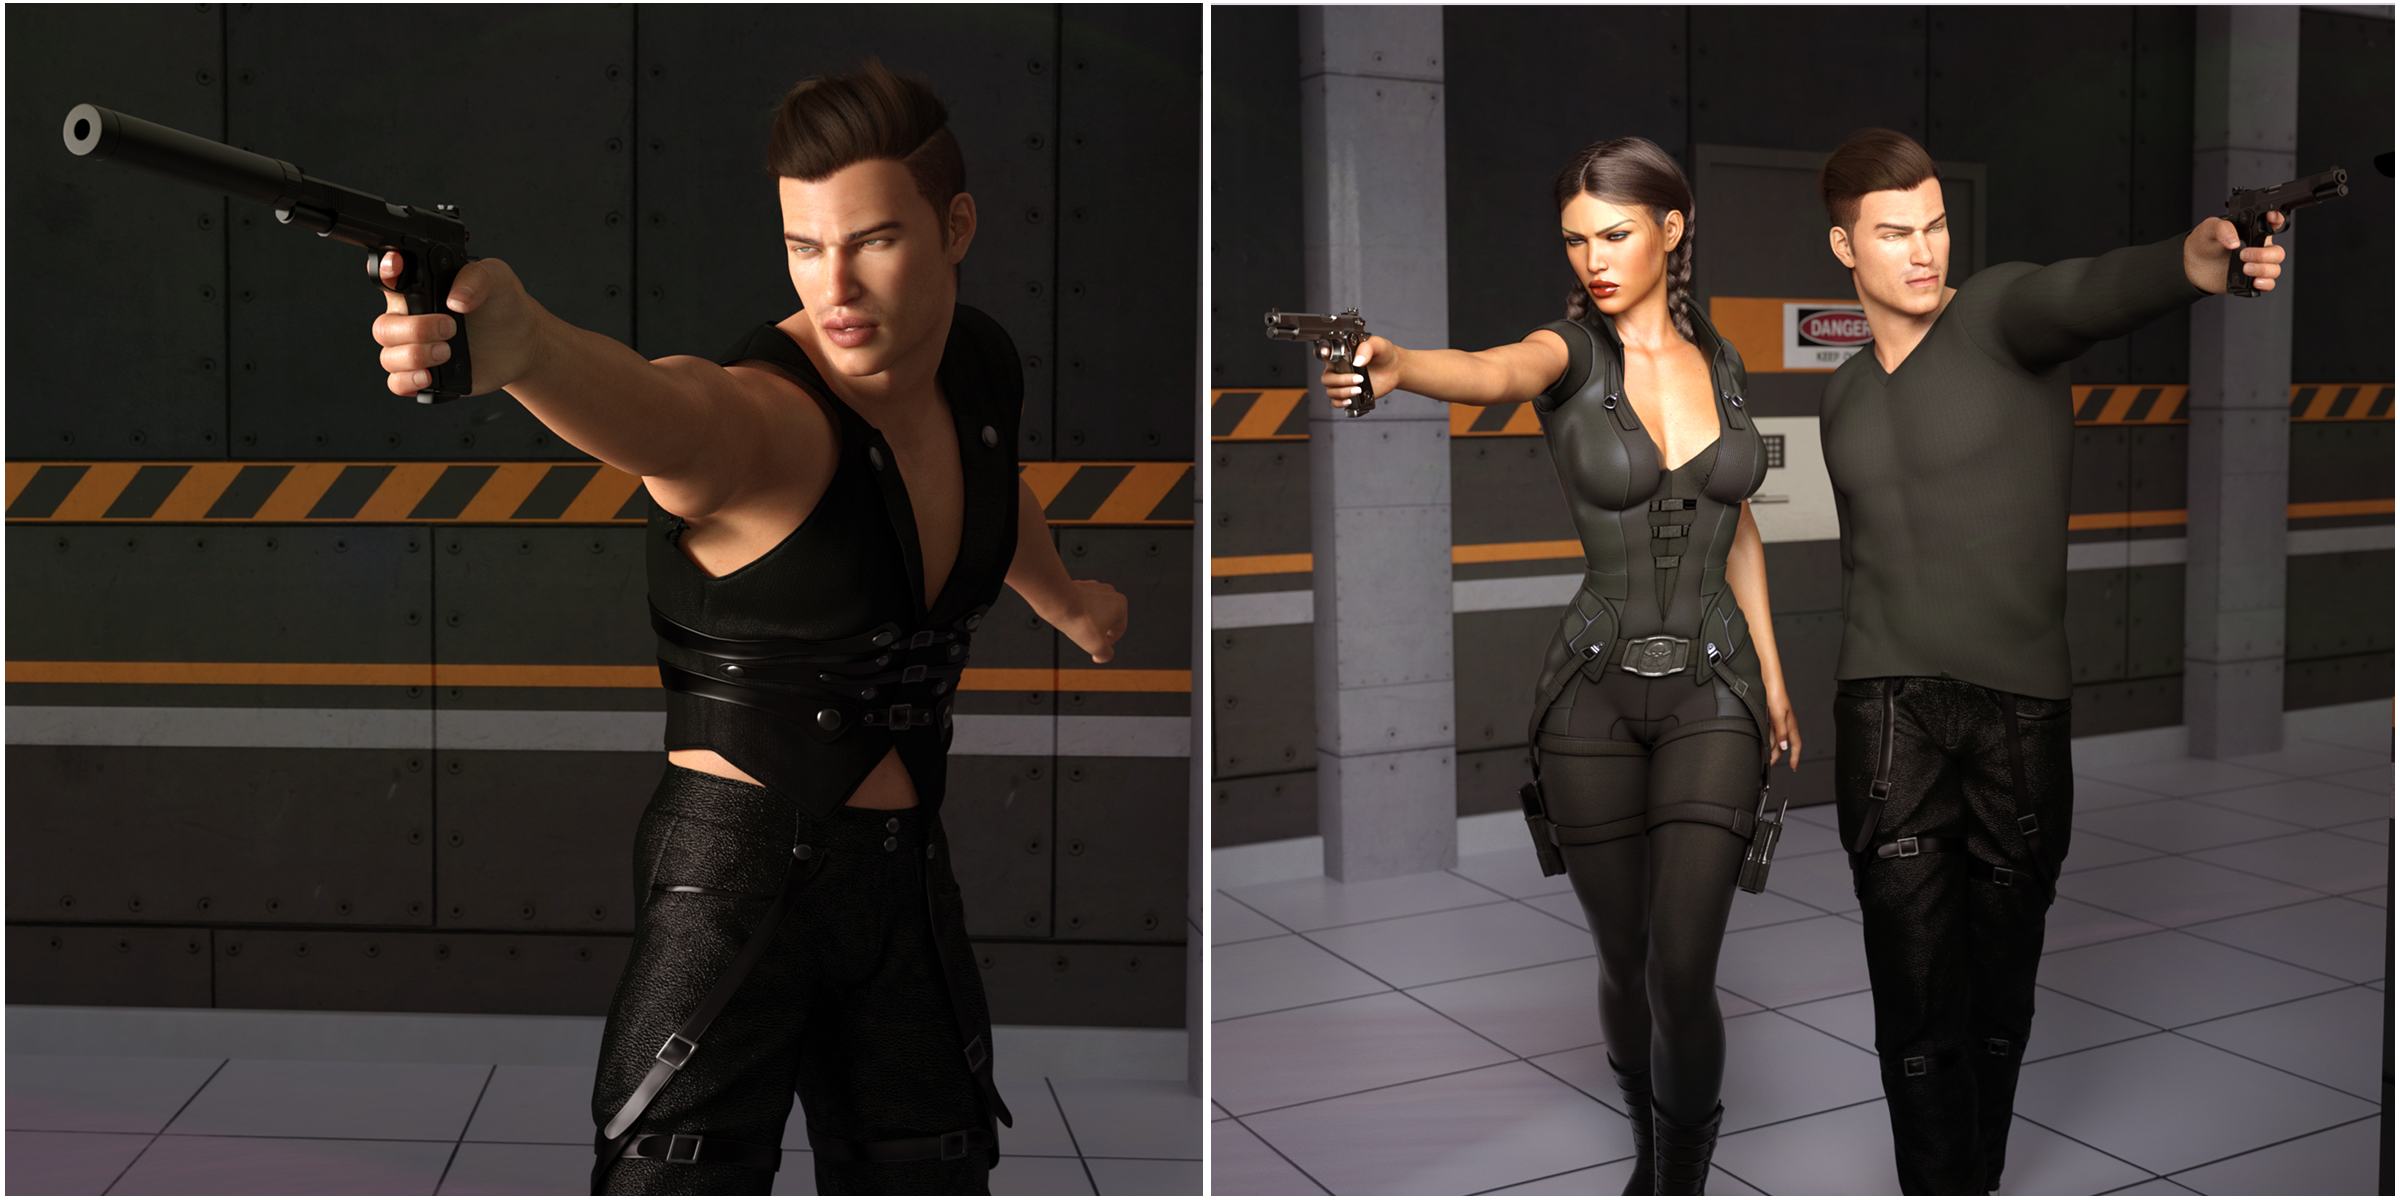 Z Hot and Loaded - Gun and Poses for Genesis 3 and 8 by: , 3D Models by Daz 3D